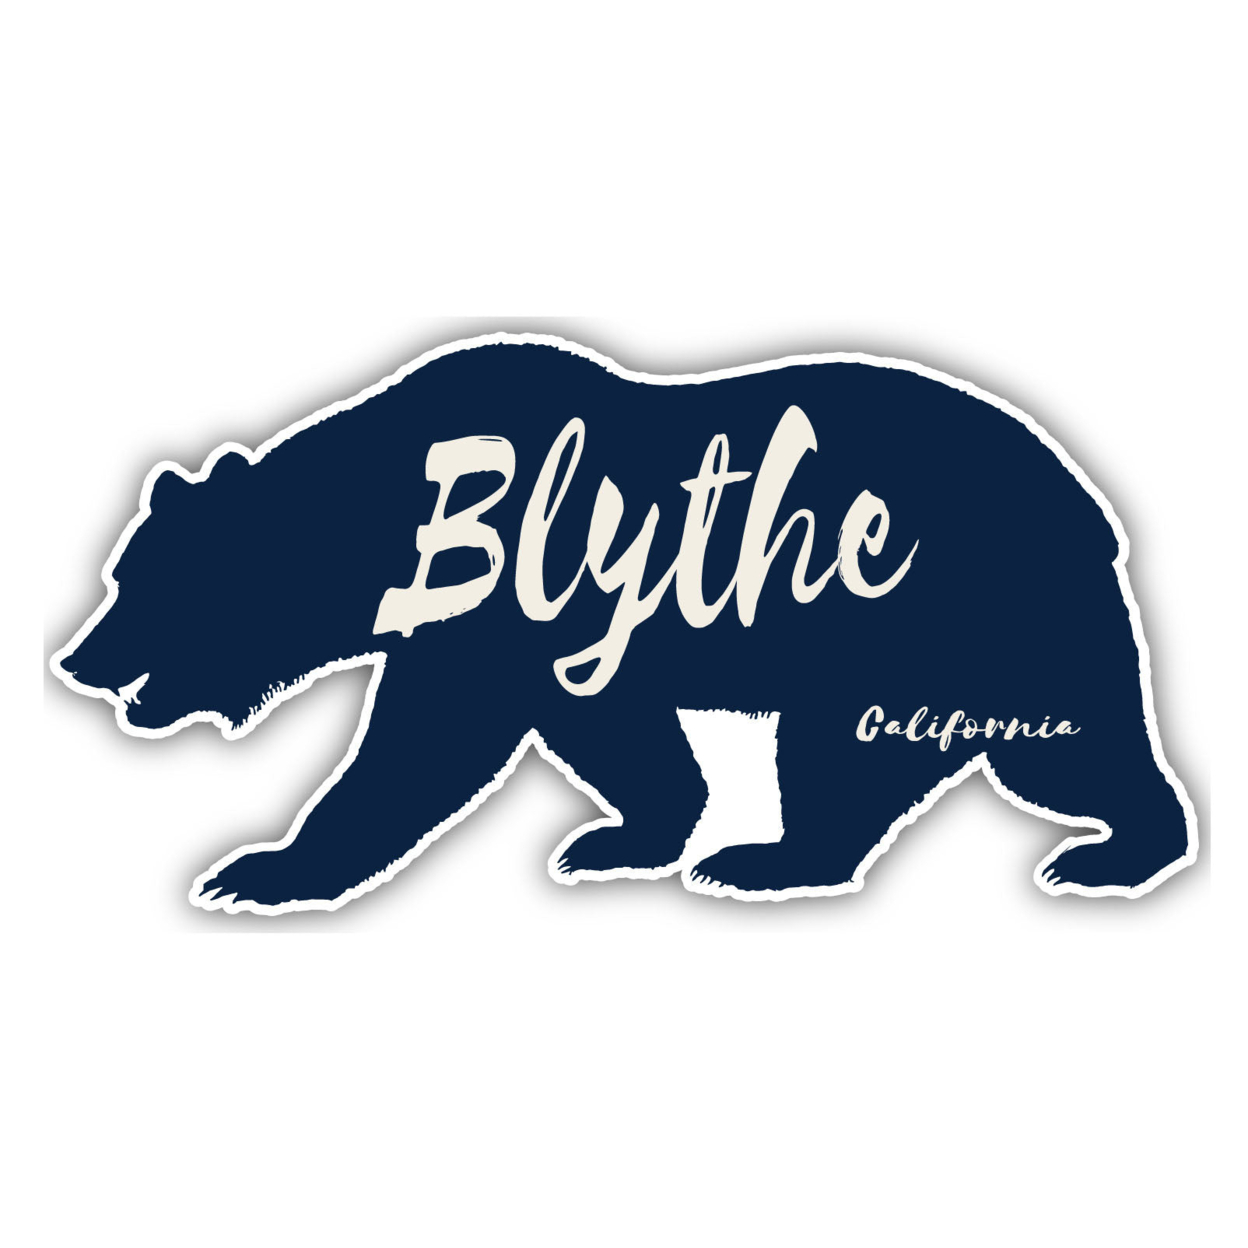 Blythe California Souvenir Decorative Stickers (Choose Theme And Size) - 4-Pack, 12-Inch, Bear